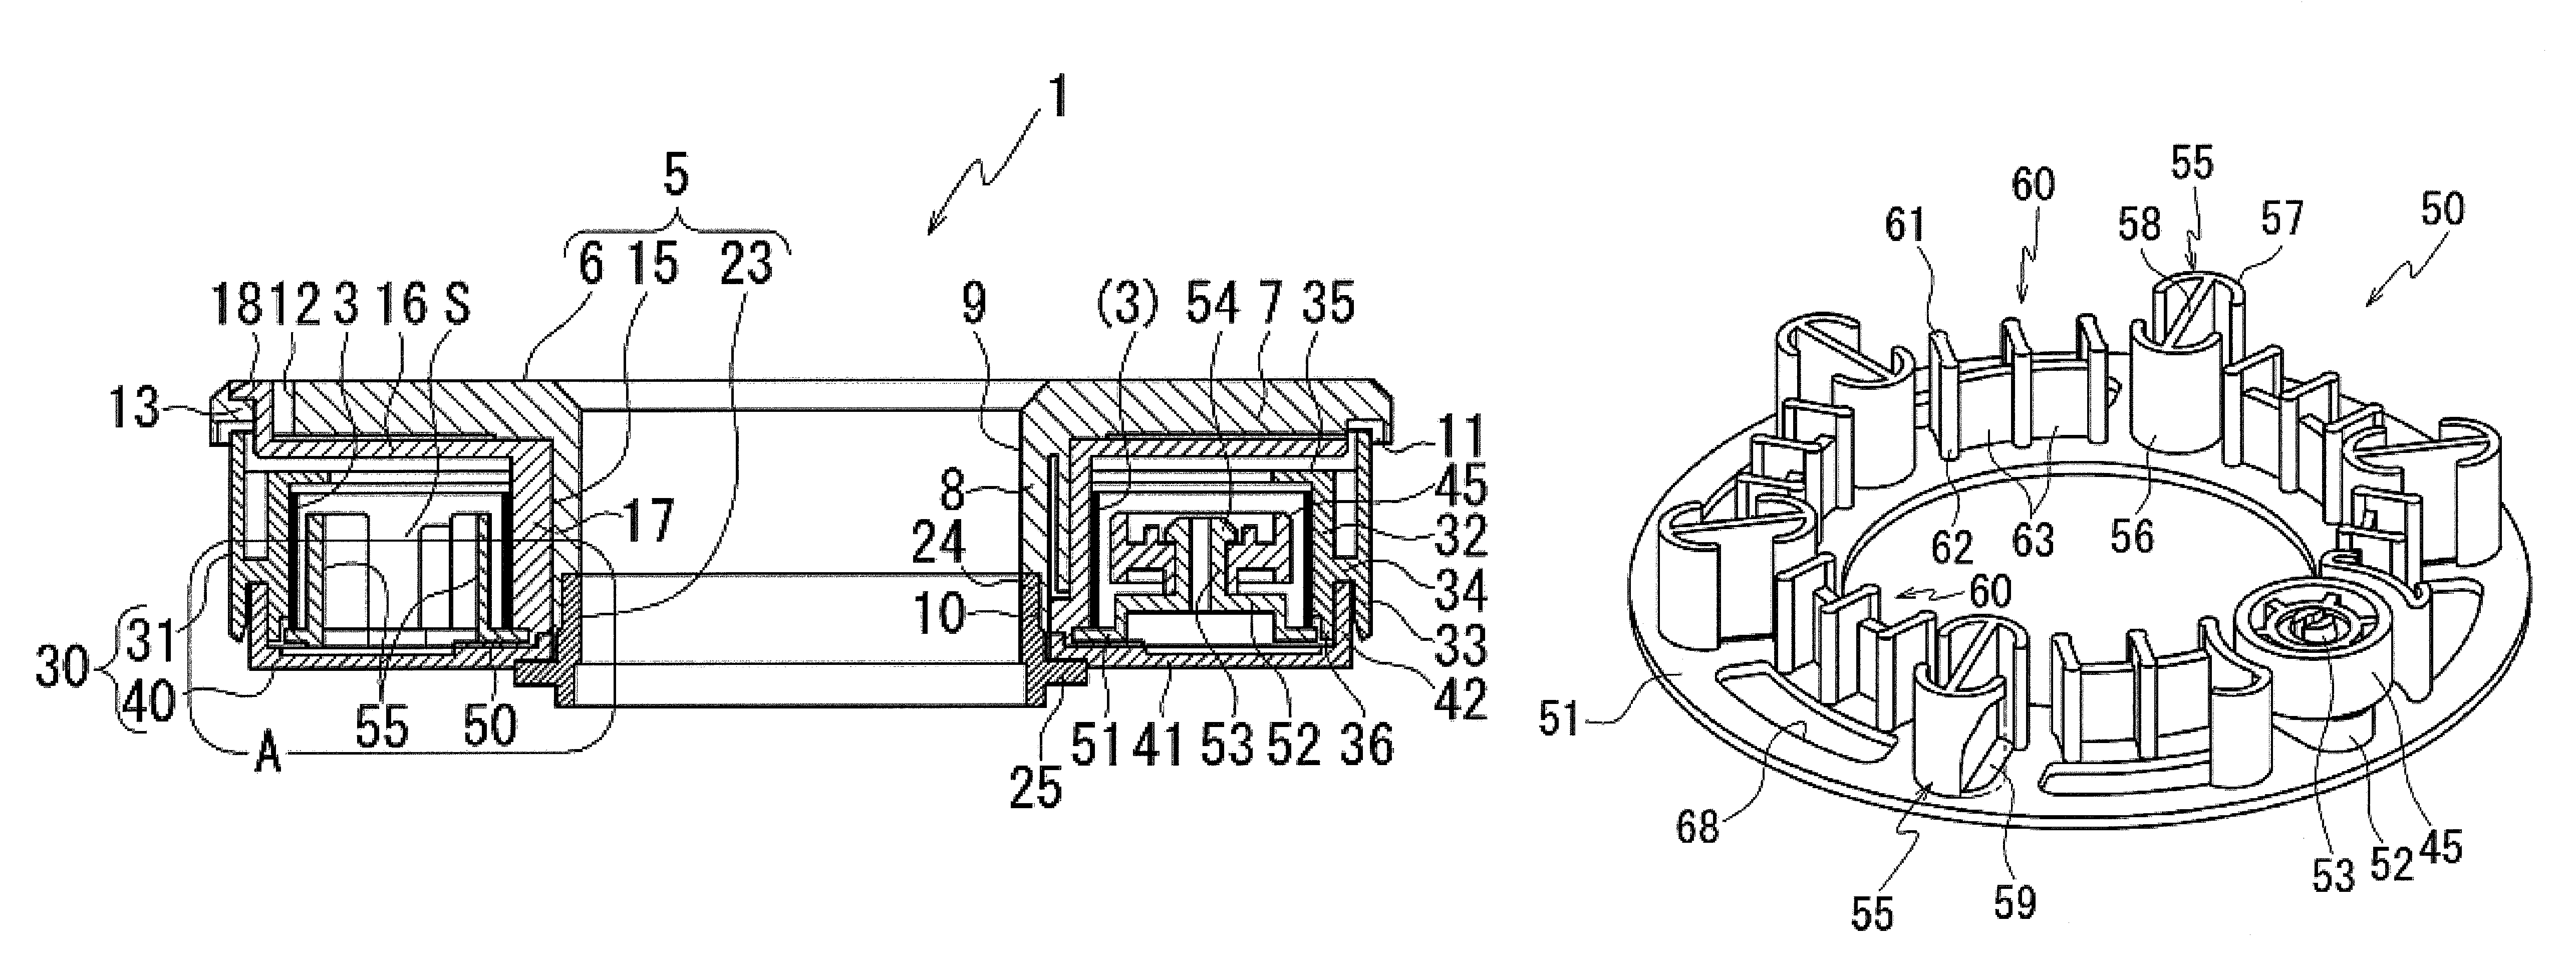 Rotational connector device including a spacer disposed in an annular space formed between a rotor and a stator